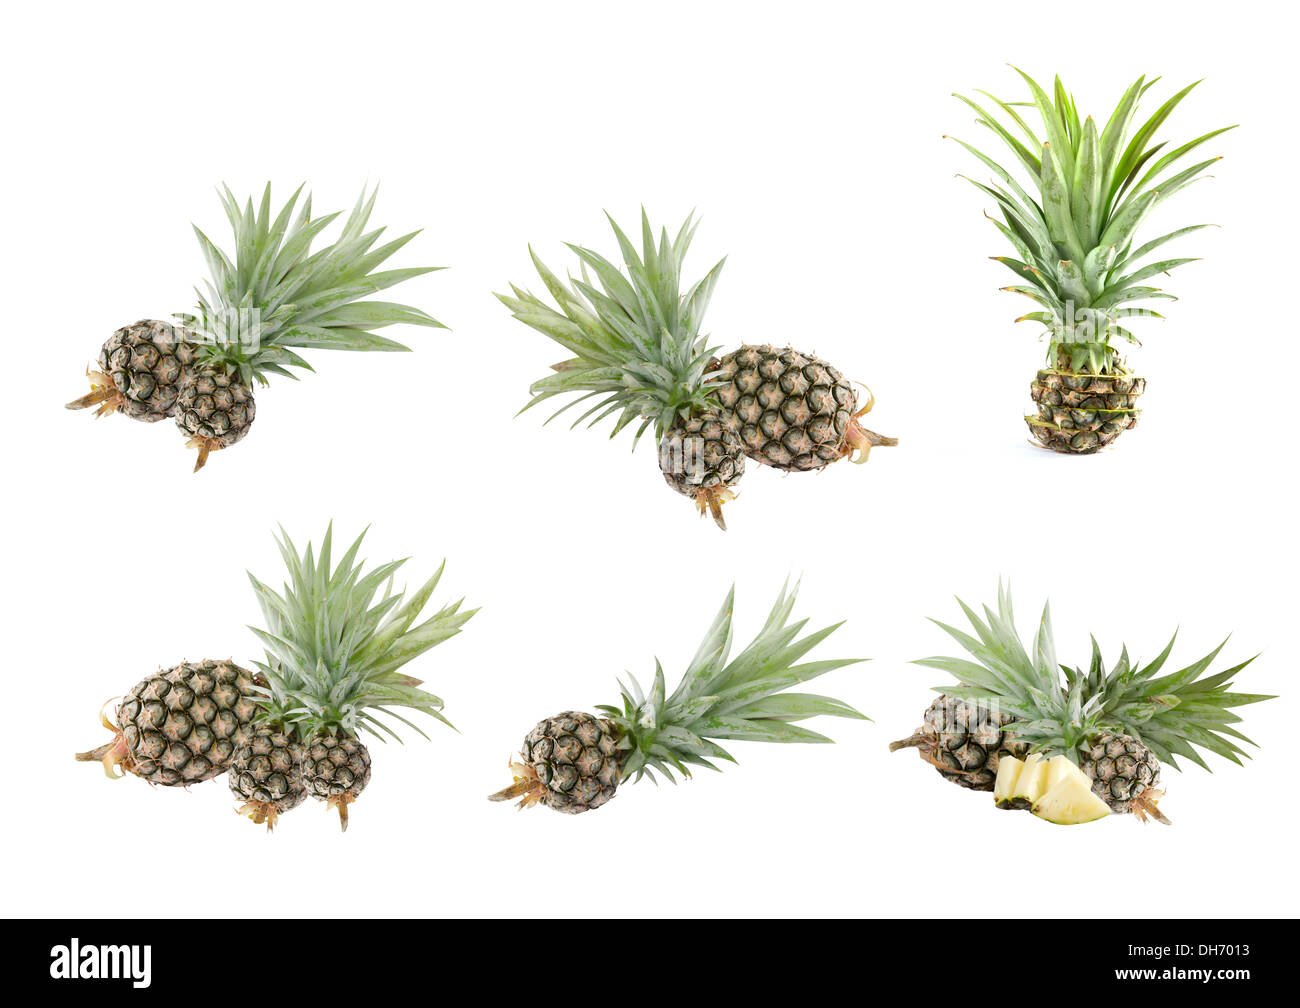 Collage from photographs of pineapple over white background Stock Photo